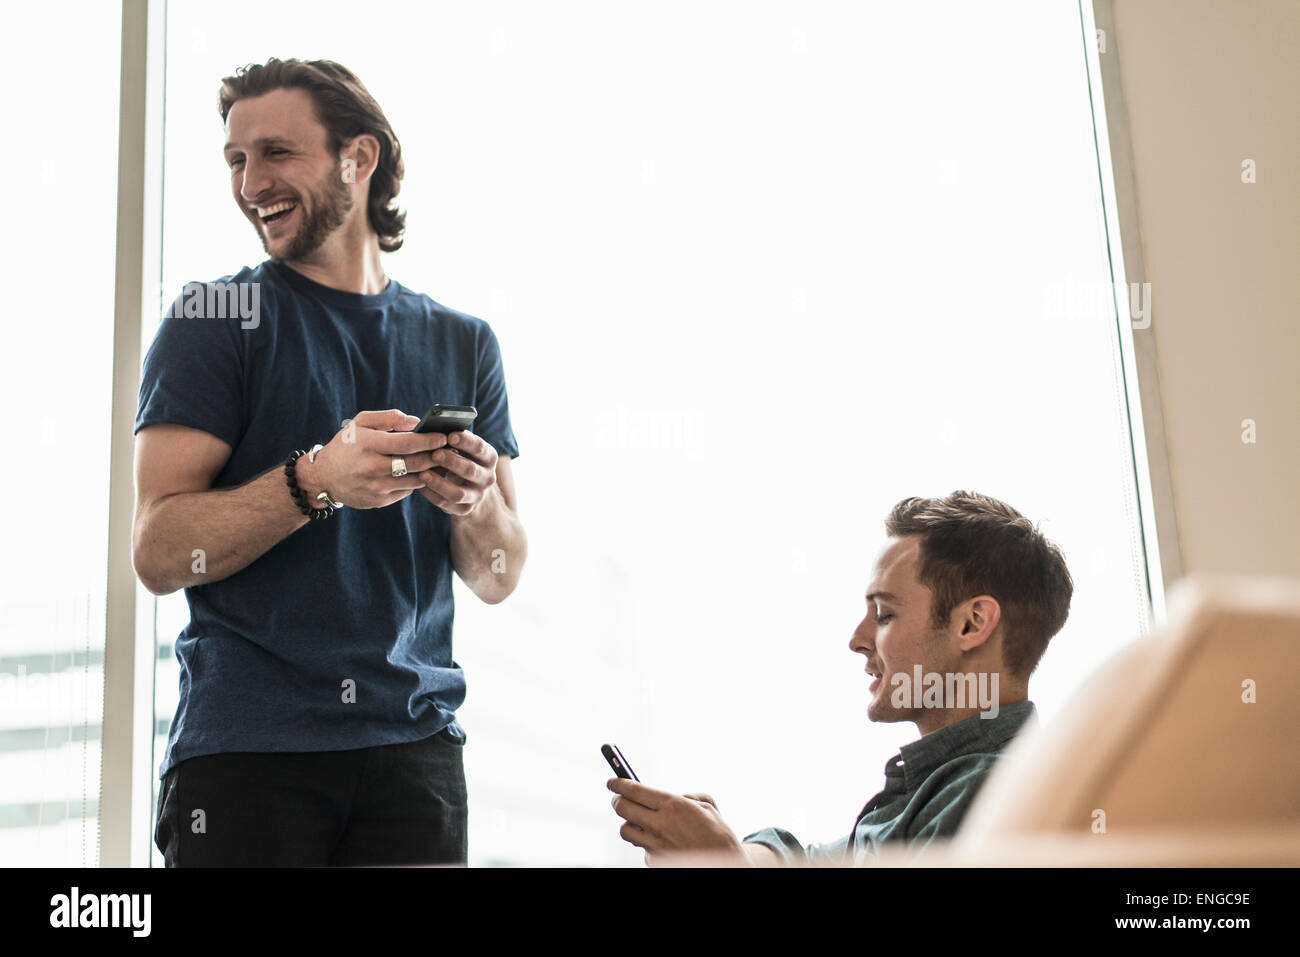 Two men in an office, checking their smart phones. One looking away laughing. Stock Photo